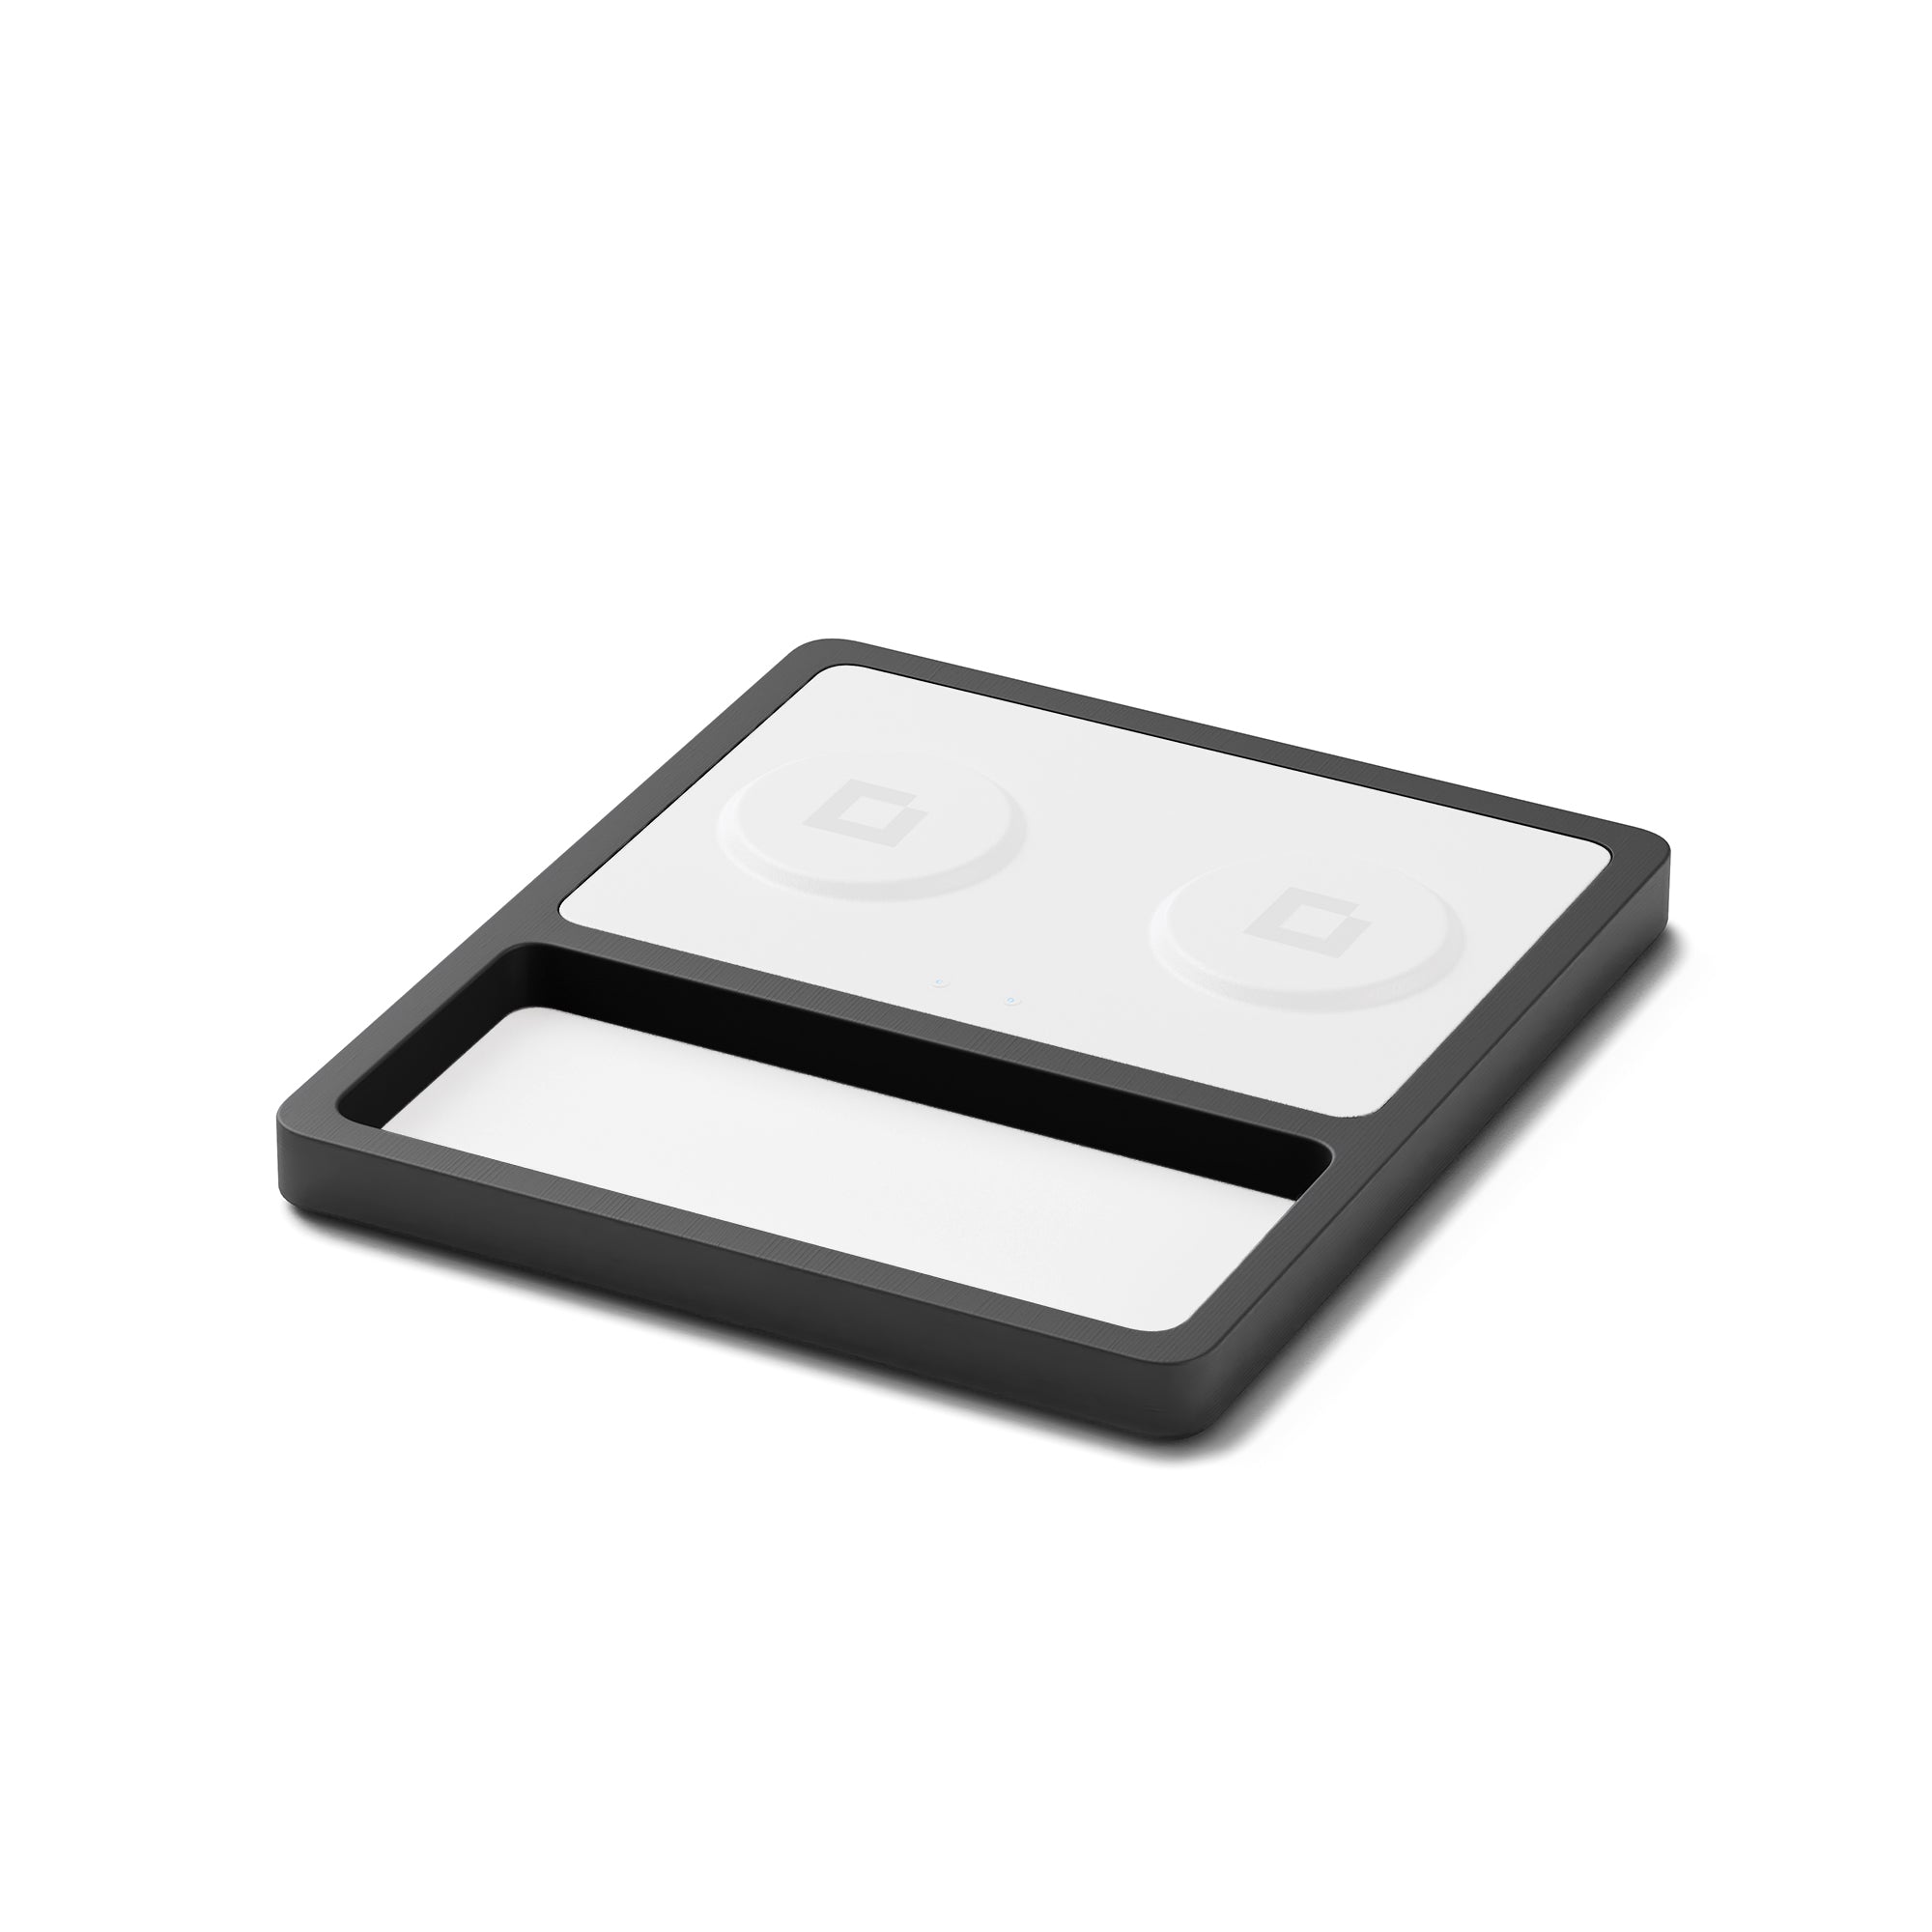 DUO TRAY White - 2-in-1 MagSafe Midnight Black Wireless Charger with USB-C and A Ports Support angle view without devices 